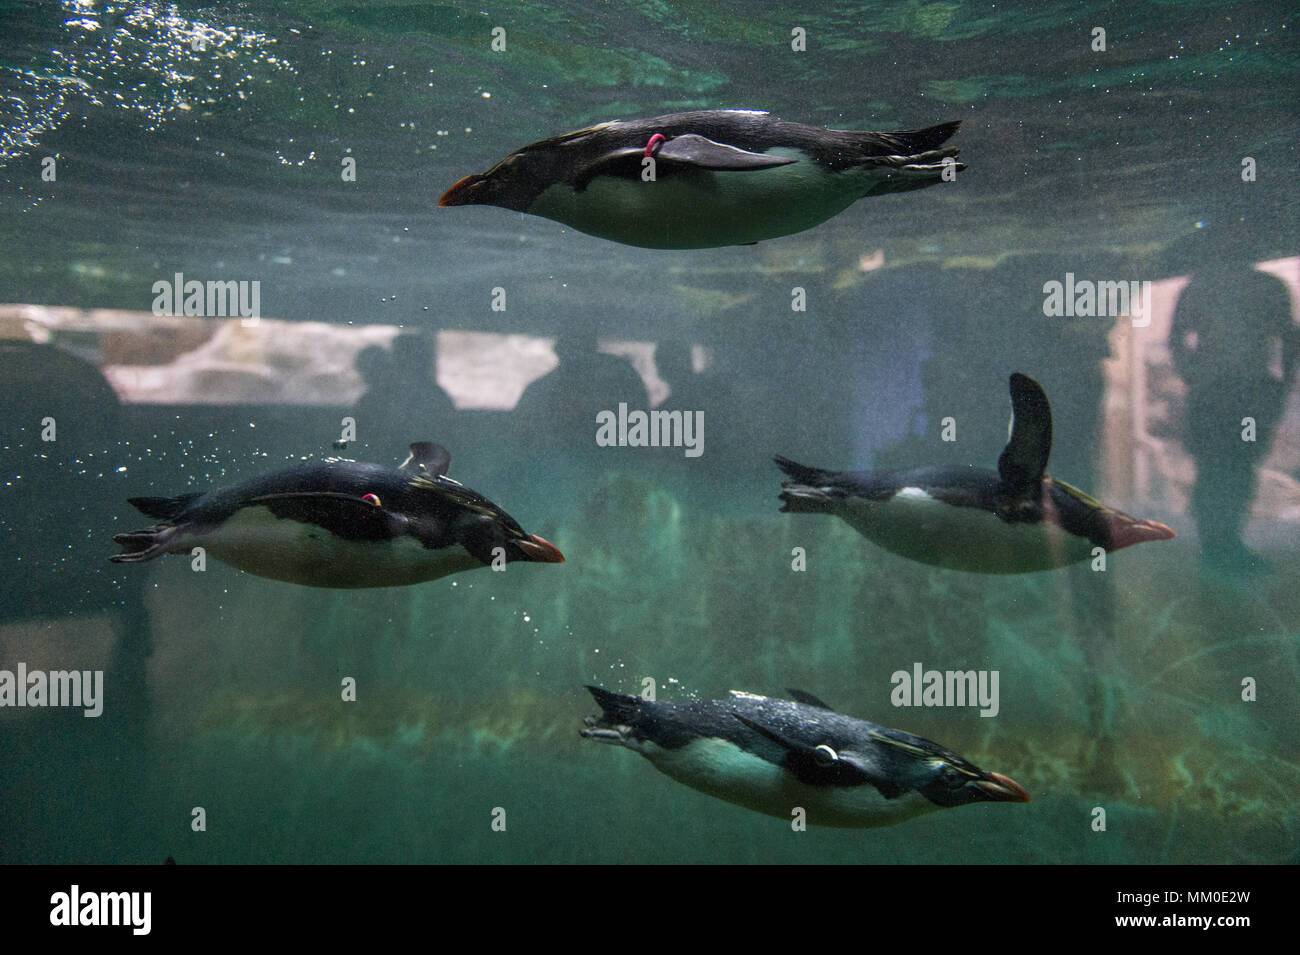 Northern rockhopper penguins are seen as they swim in their inclosure at Tiergarten Schoenbrunn Zoo in Vienna. The Tiergarten Schoenbrunn Zoo was founded in 1752, and it is the oldest operating zoo in the world. Stock Photo